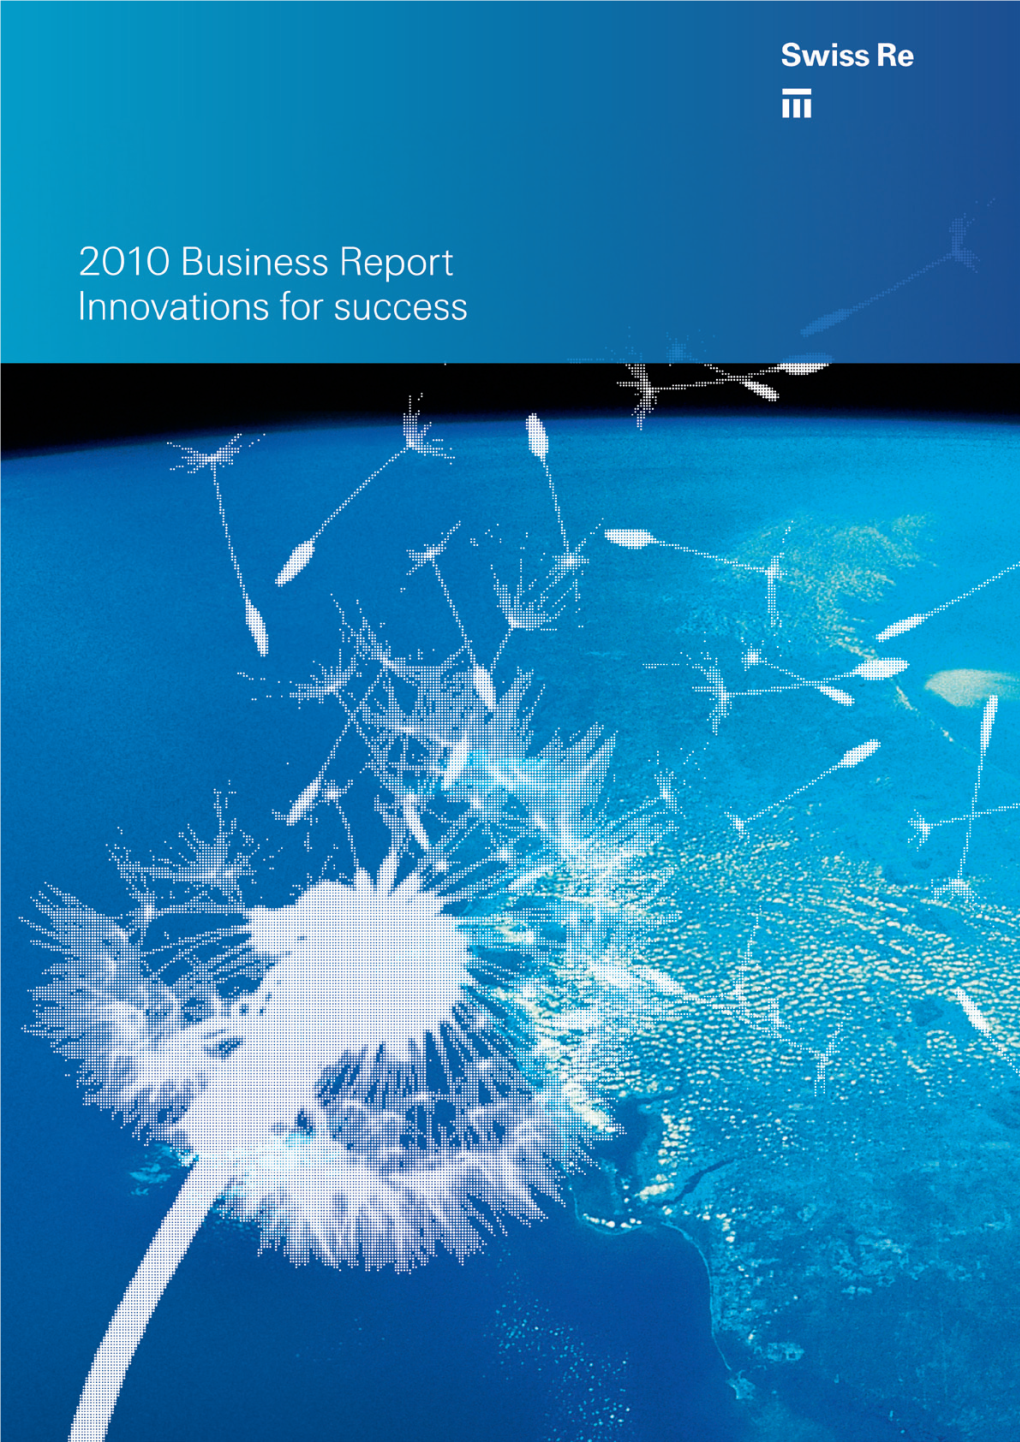 2010 Business Report Innovations for Success Overview / Financial Highlights